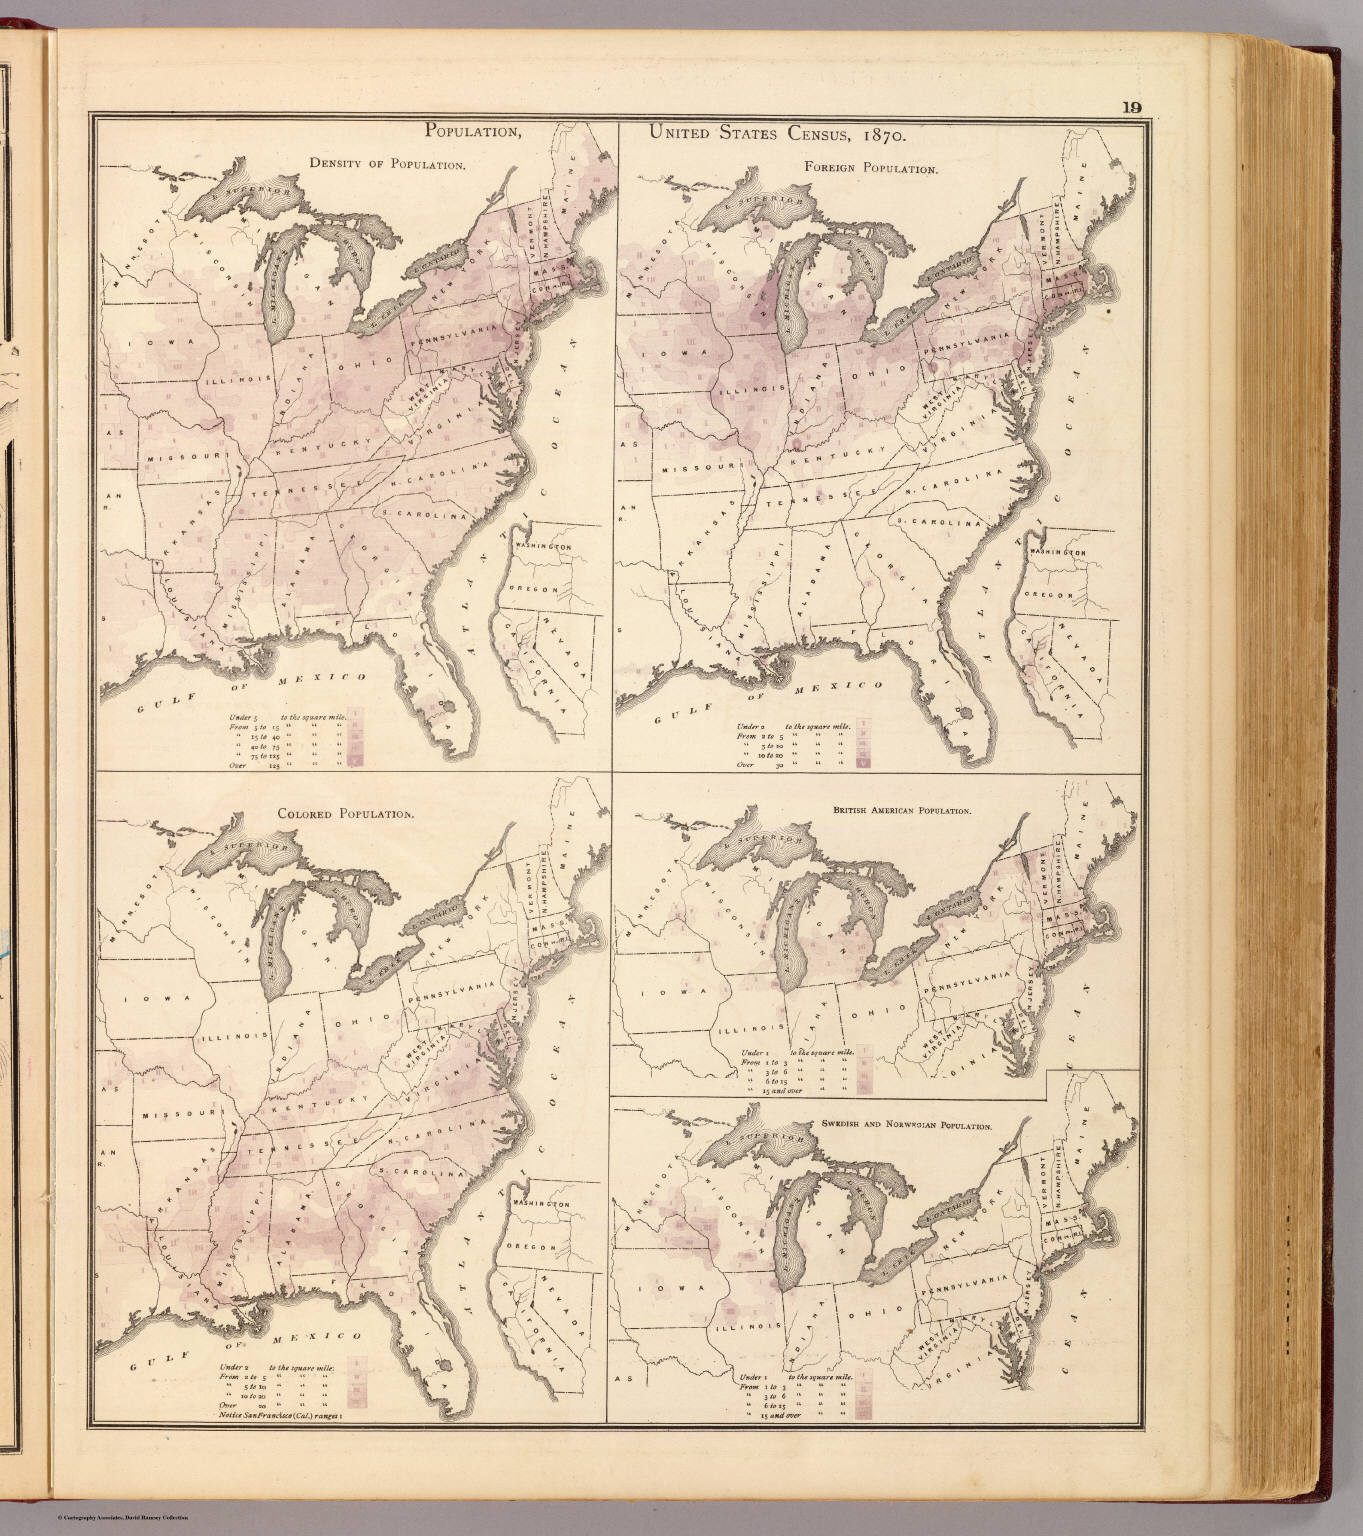 1870 population density map of the us